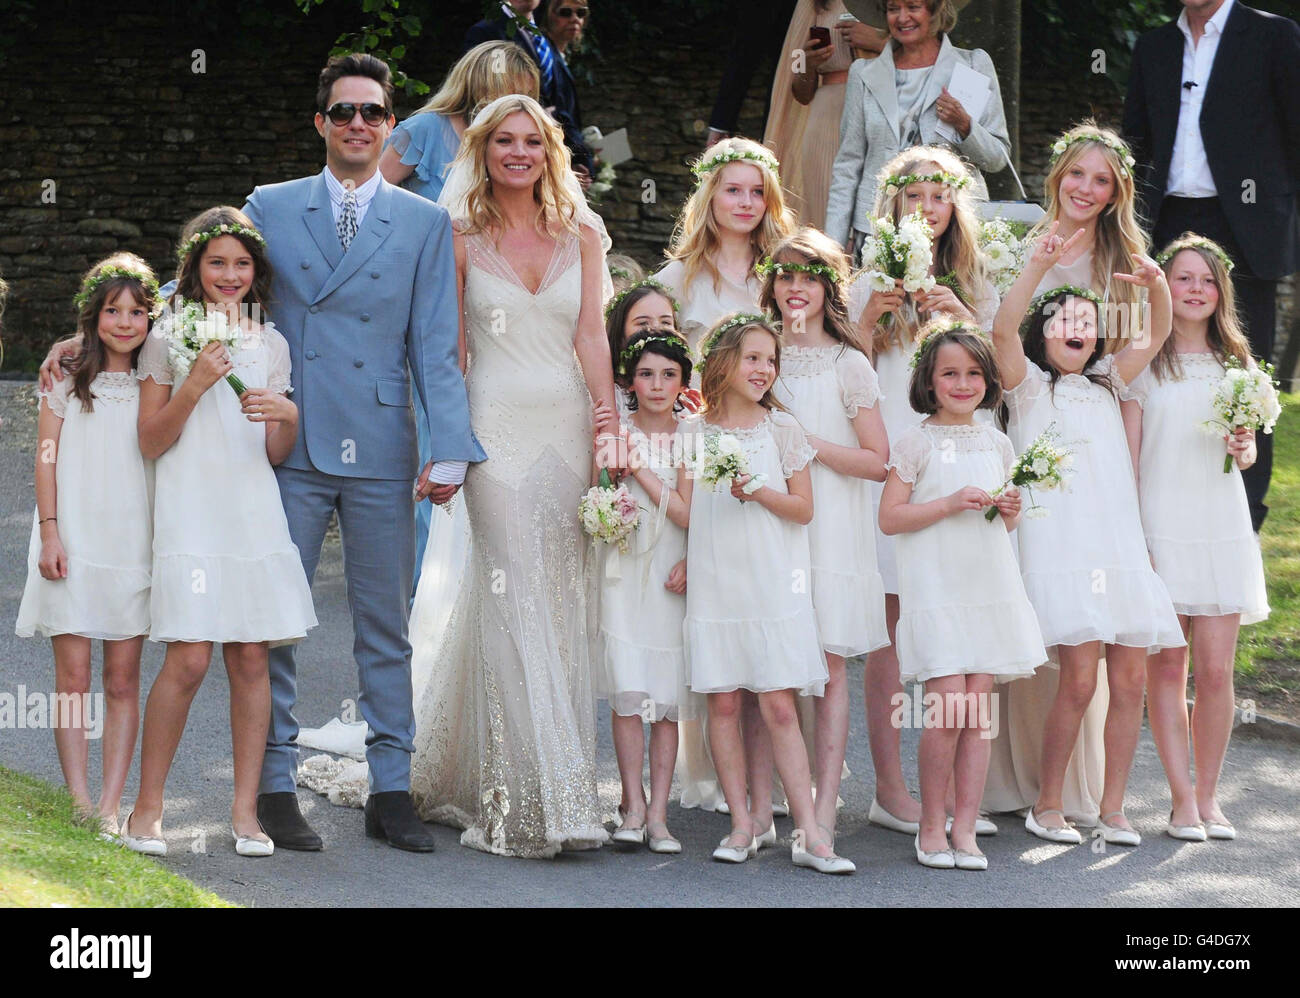 Kate Moss with her new husband Jamie Hince pose with bridesmaids after their wedding at St Peter's Church in Southrop. Stock Photo